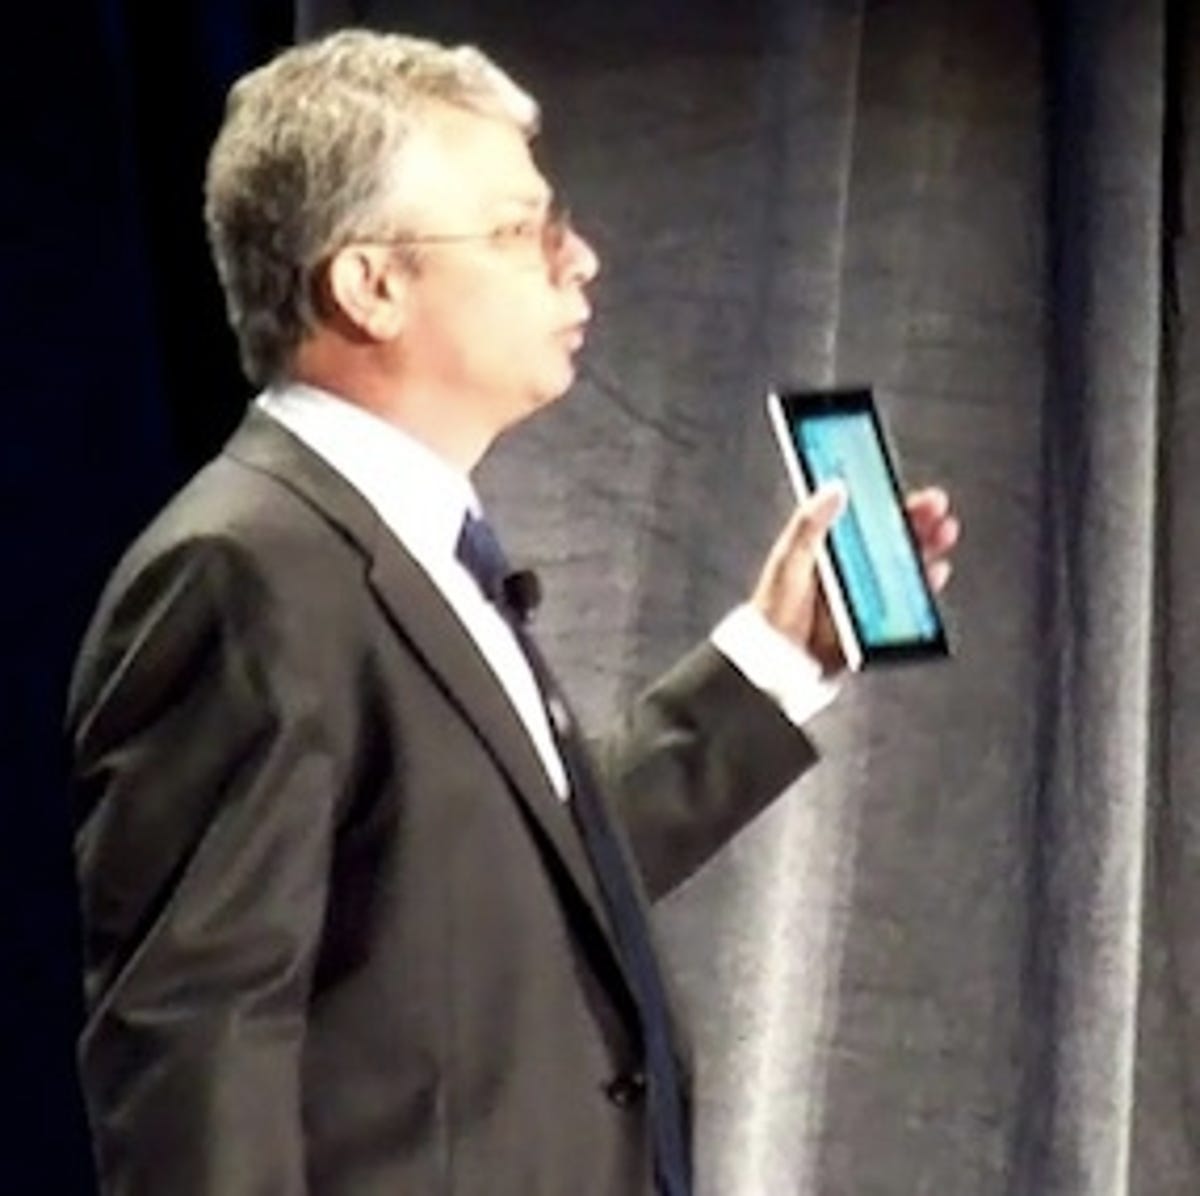 Intel executive VP David Perlmutter showed off a 7-inch 'reference design' tablet the company is showing to customers.